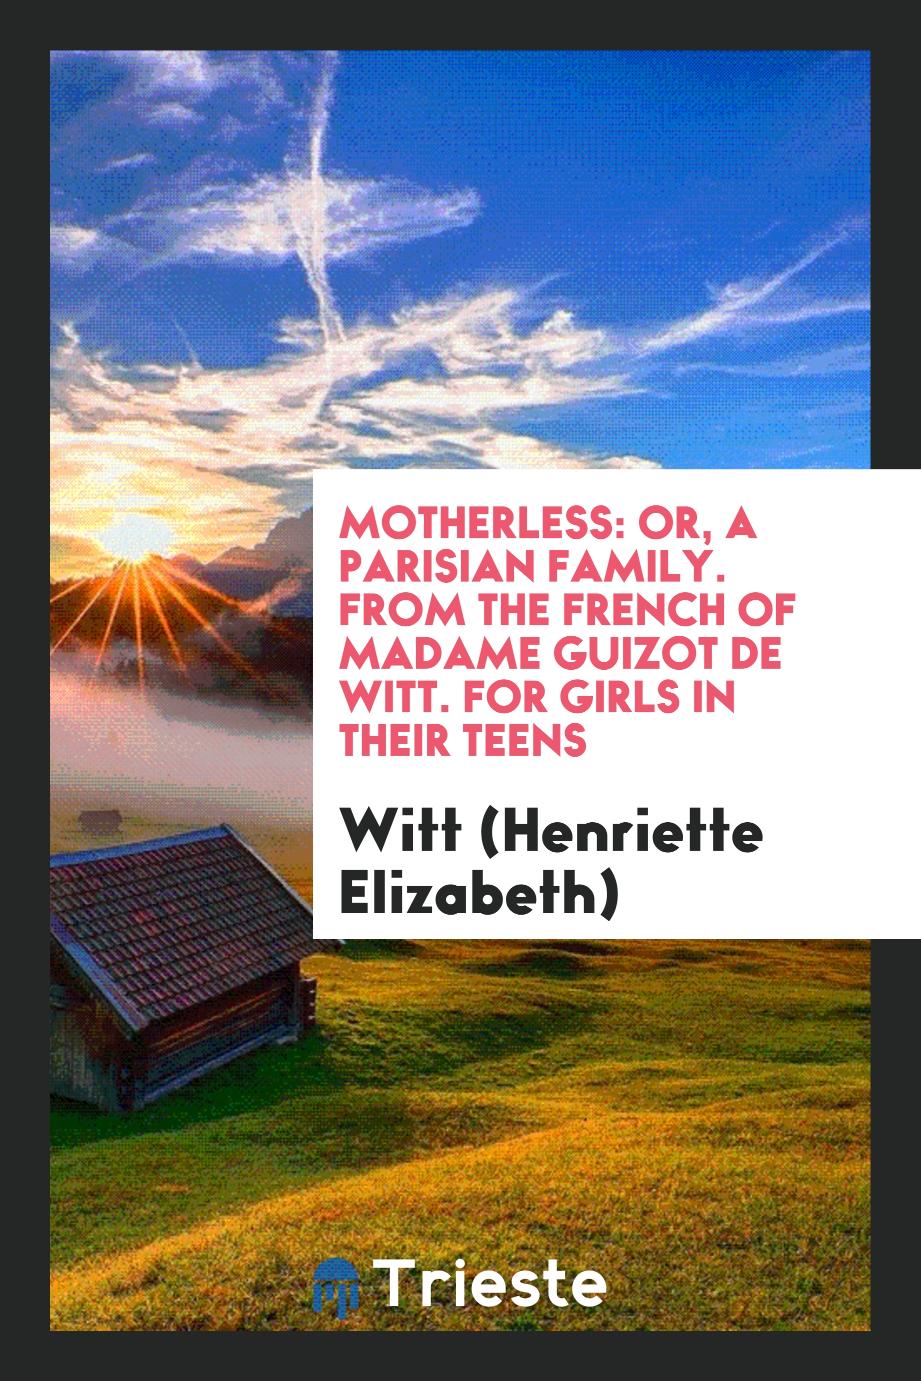 Motherless: Or, A Parisian Family. From the French of Madame Guizot De Witt. For Girls in Their Teens